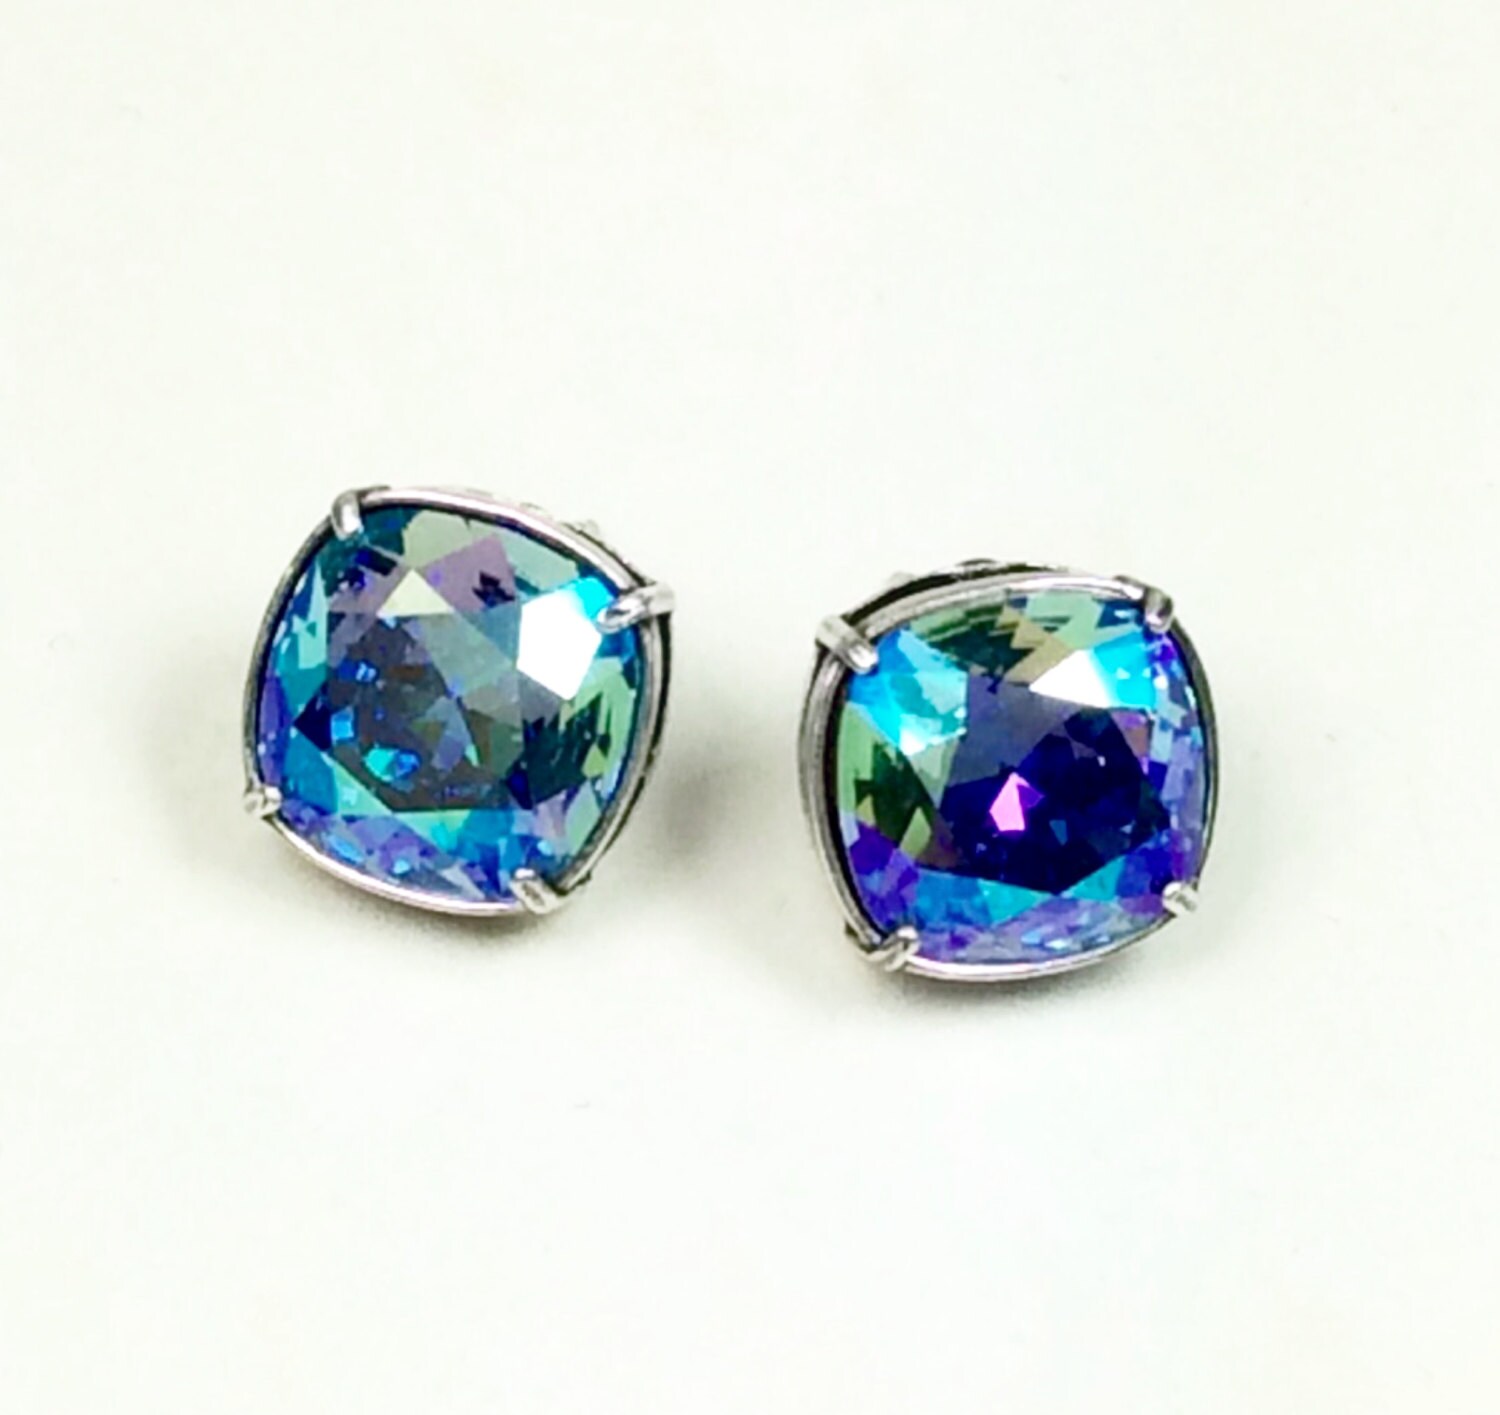 Swarovski Crystal 12MM Cushion Cut Stud Earrings - Gorgeous  Earrings - Aquamarine AB or Your Favorite Color and Finish - FREE SHIPPING